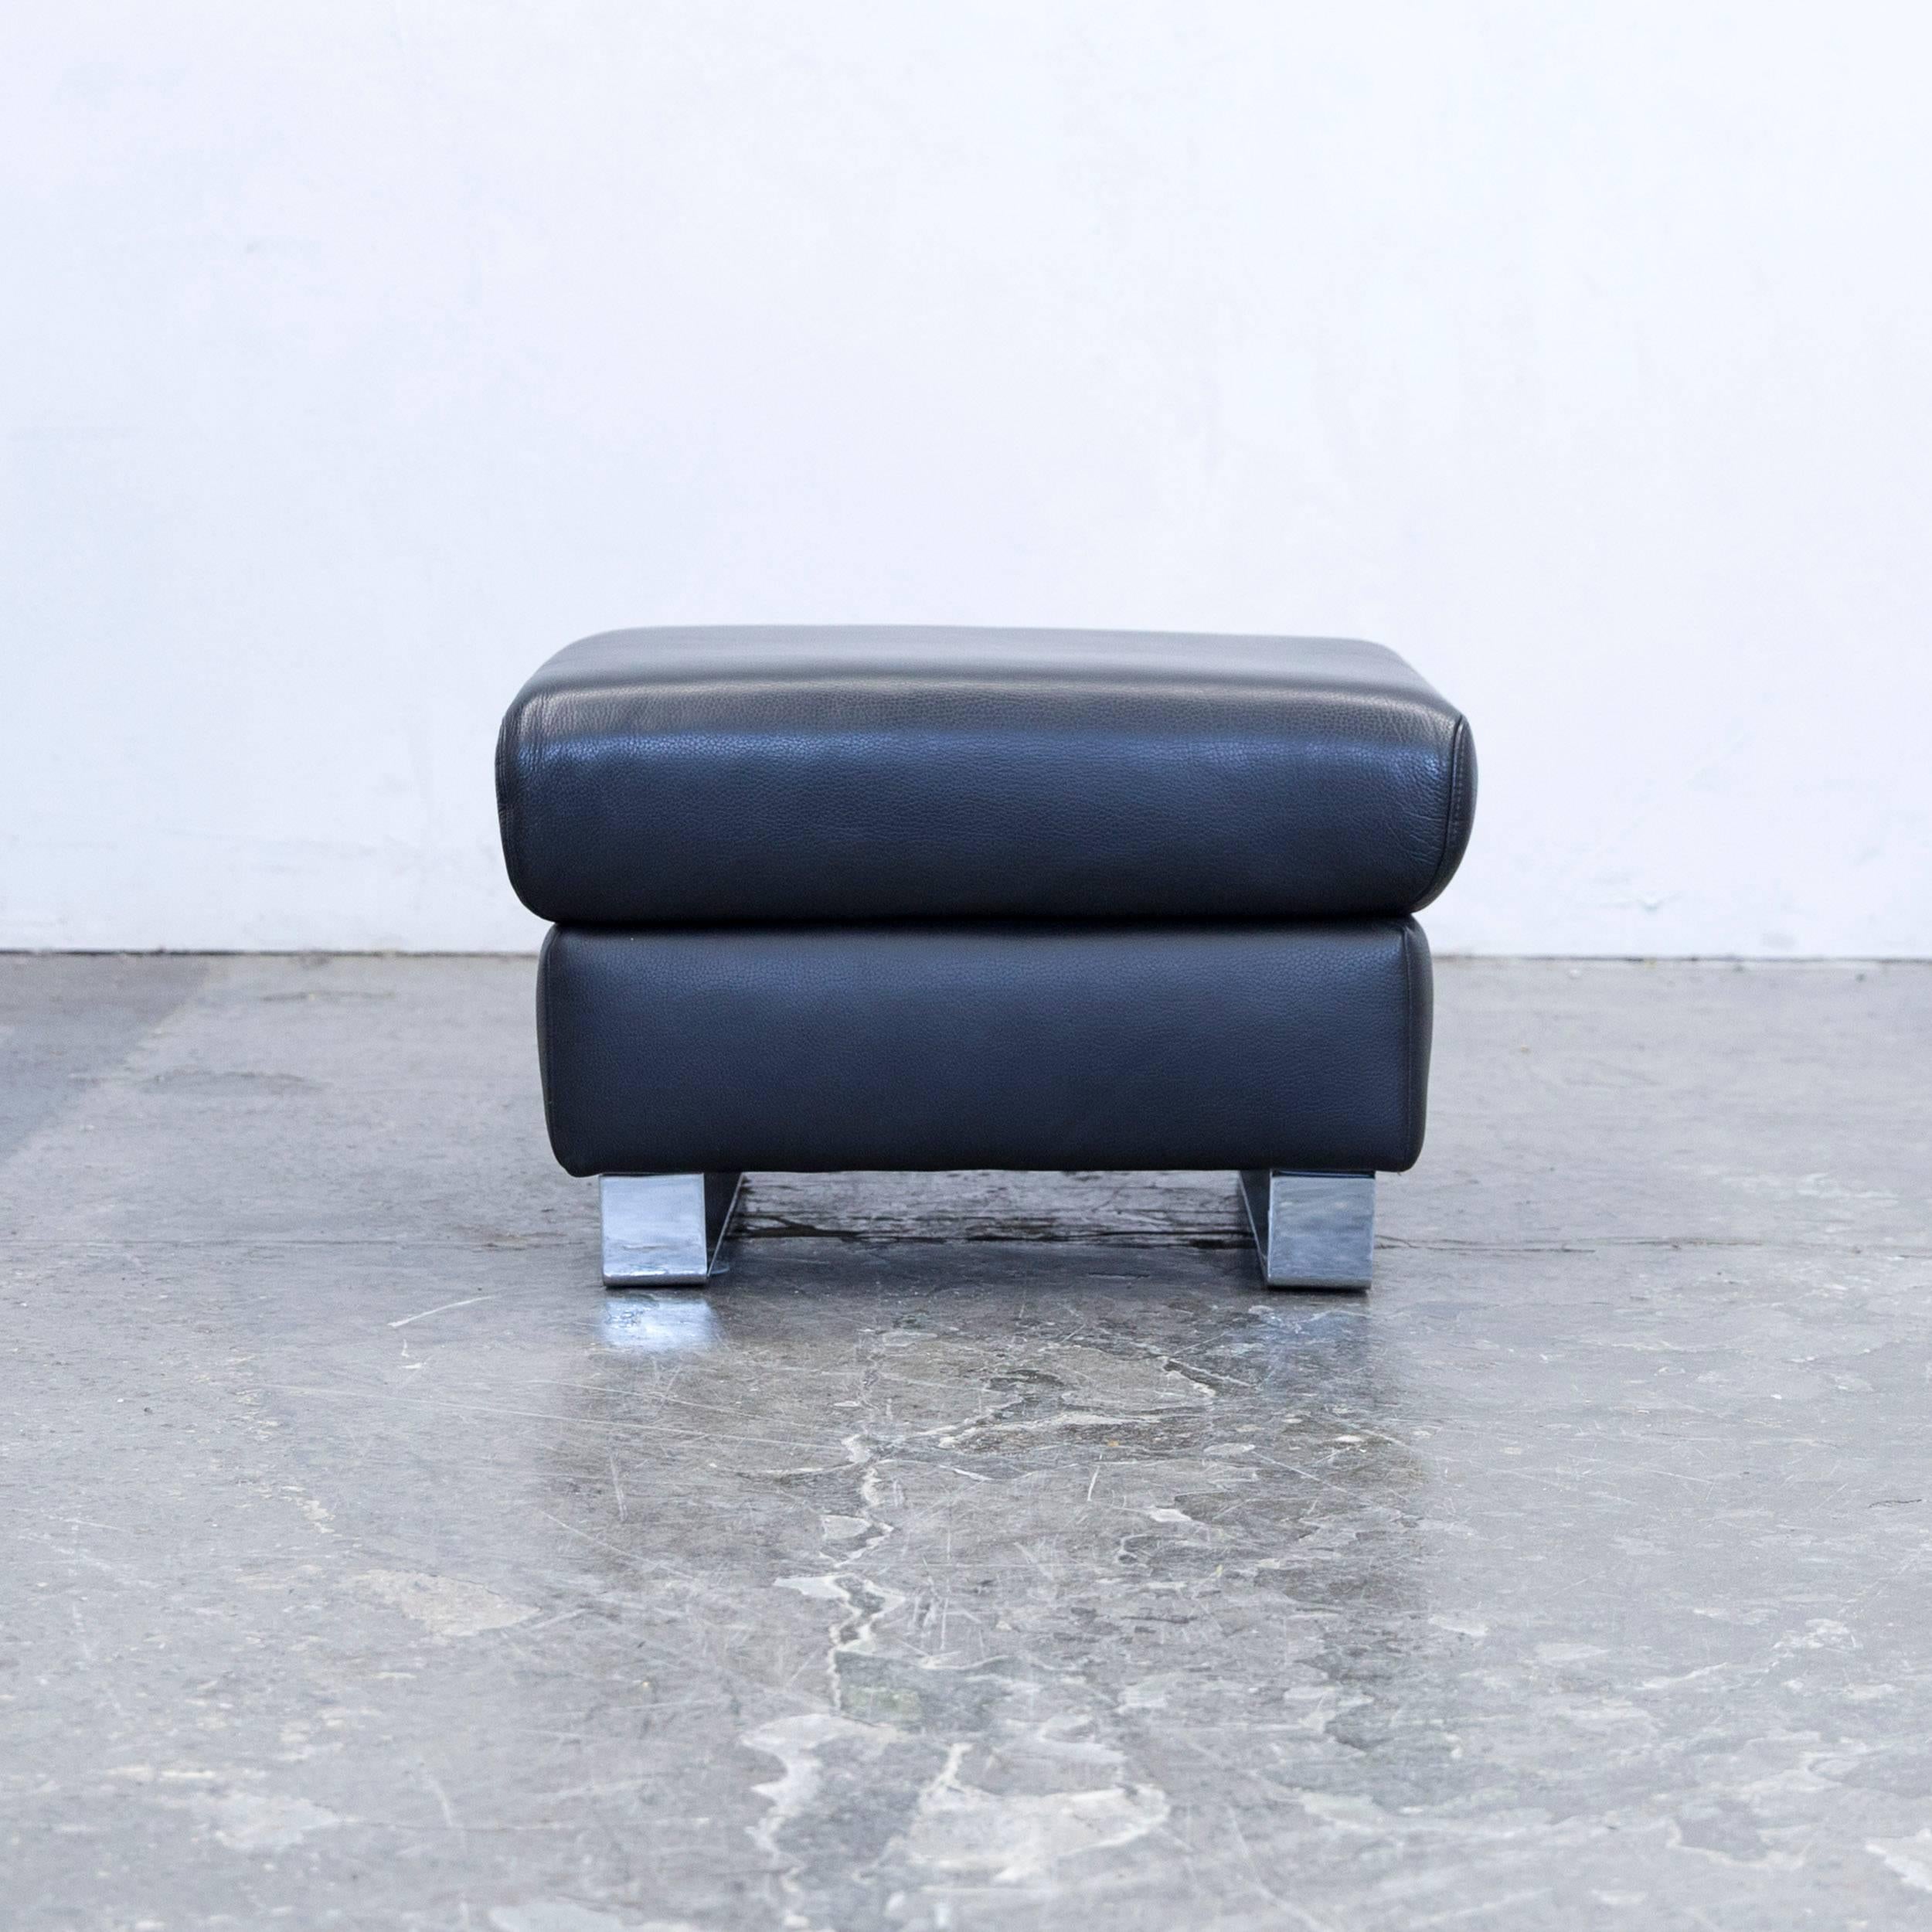 Black colored original Ewald Schillig Harry designer leather footstool, in a minimalistic and modern design, made for pure comfort.